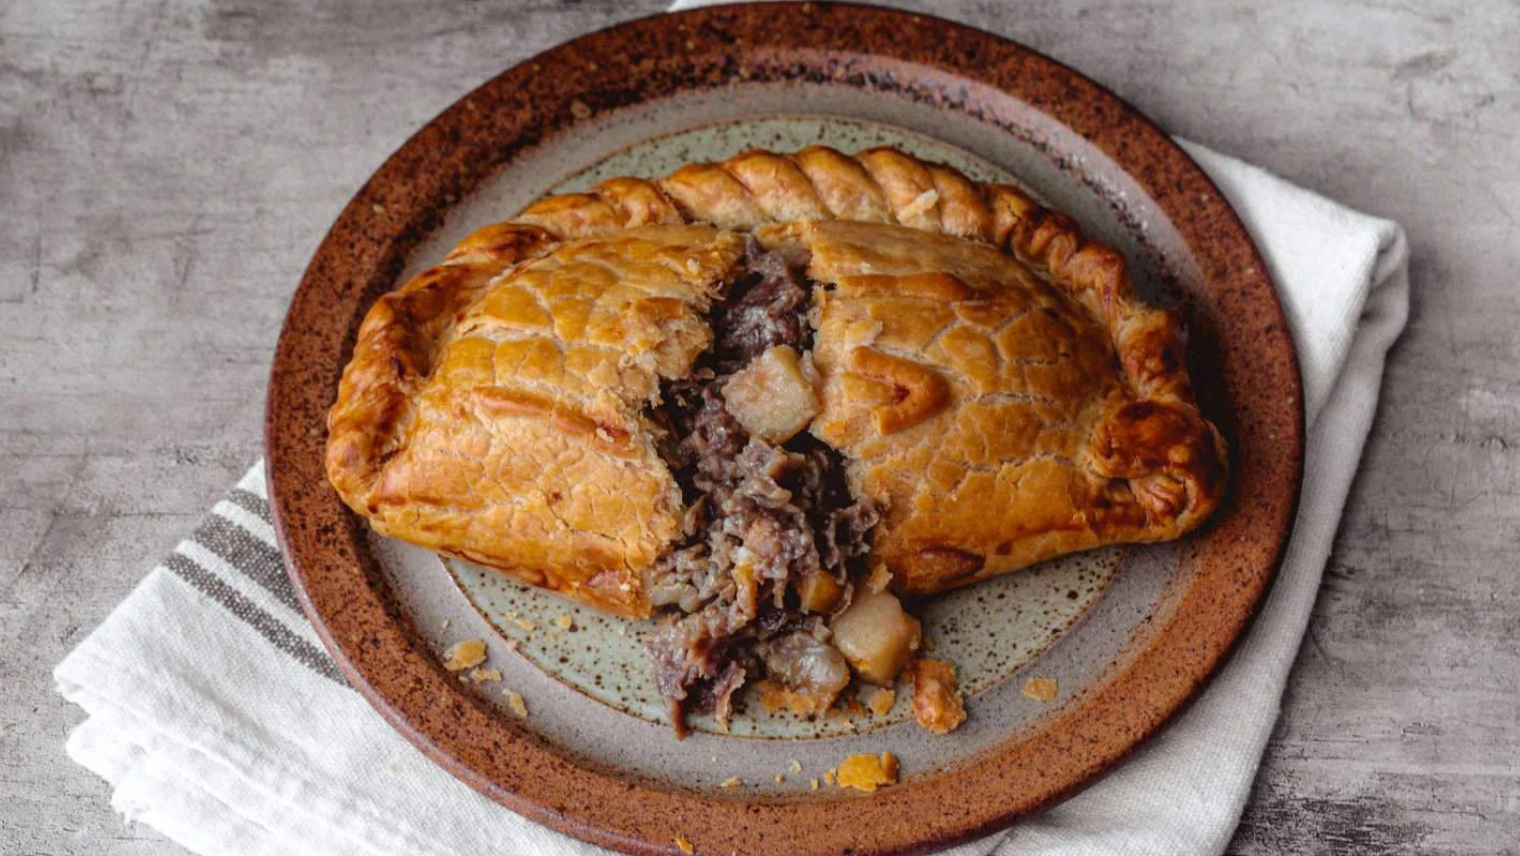 A pasty from Chunk of Devon on a plate